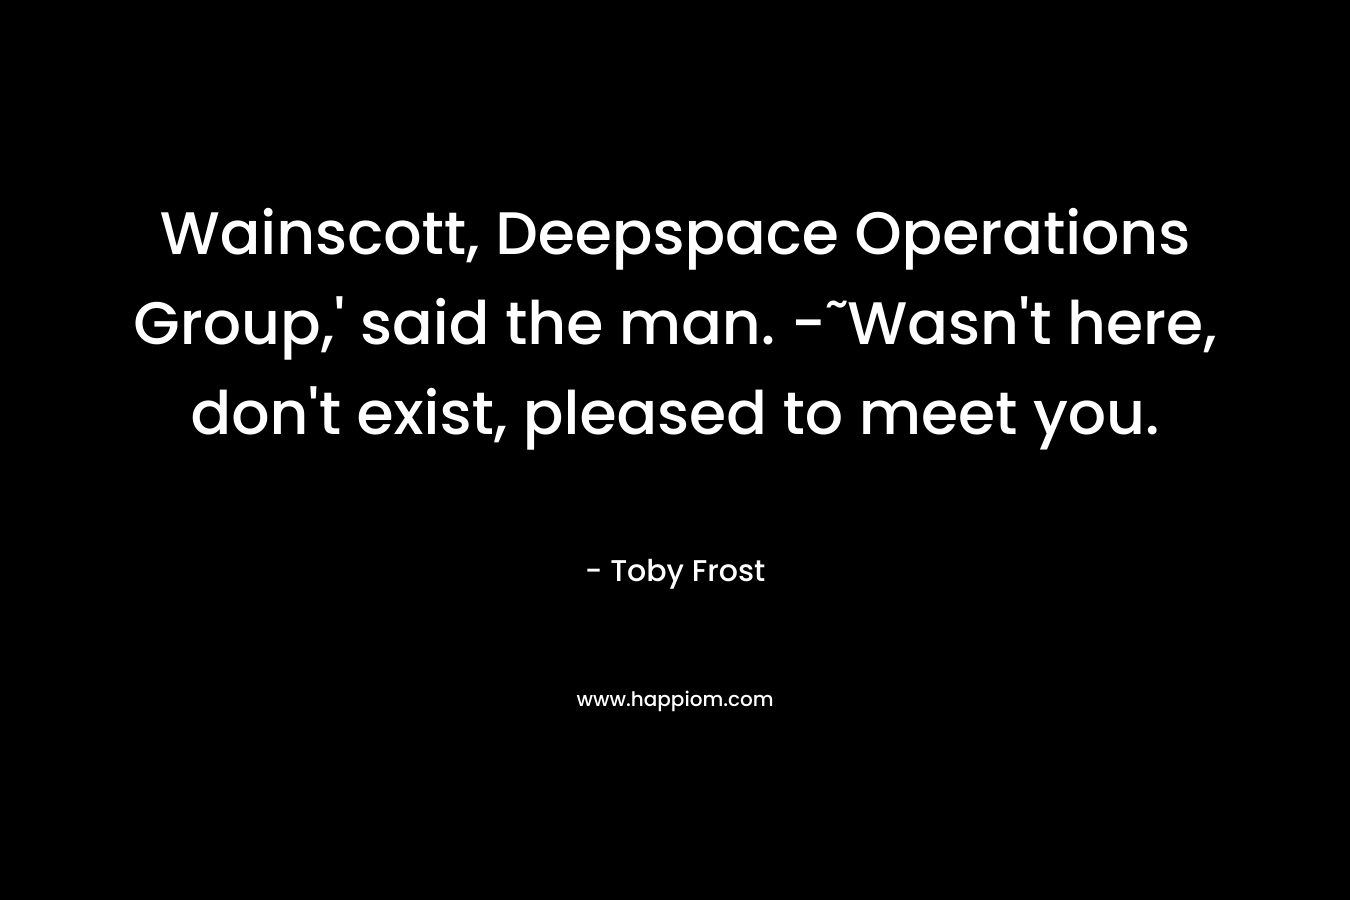 Wainscott, Deepspace Operations Group,’ said the man. -˜Wasn’t here, don’t exist, pleased to meet you. – Toby Frost